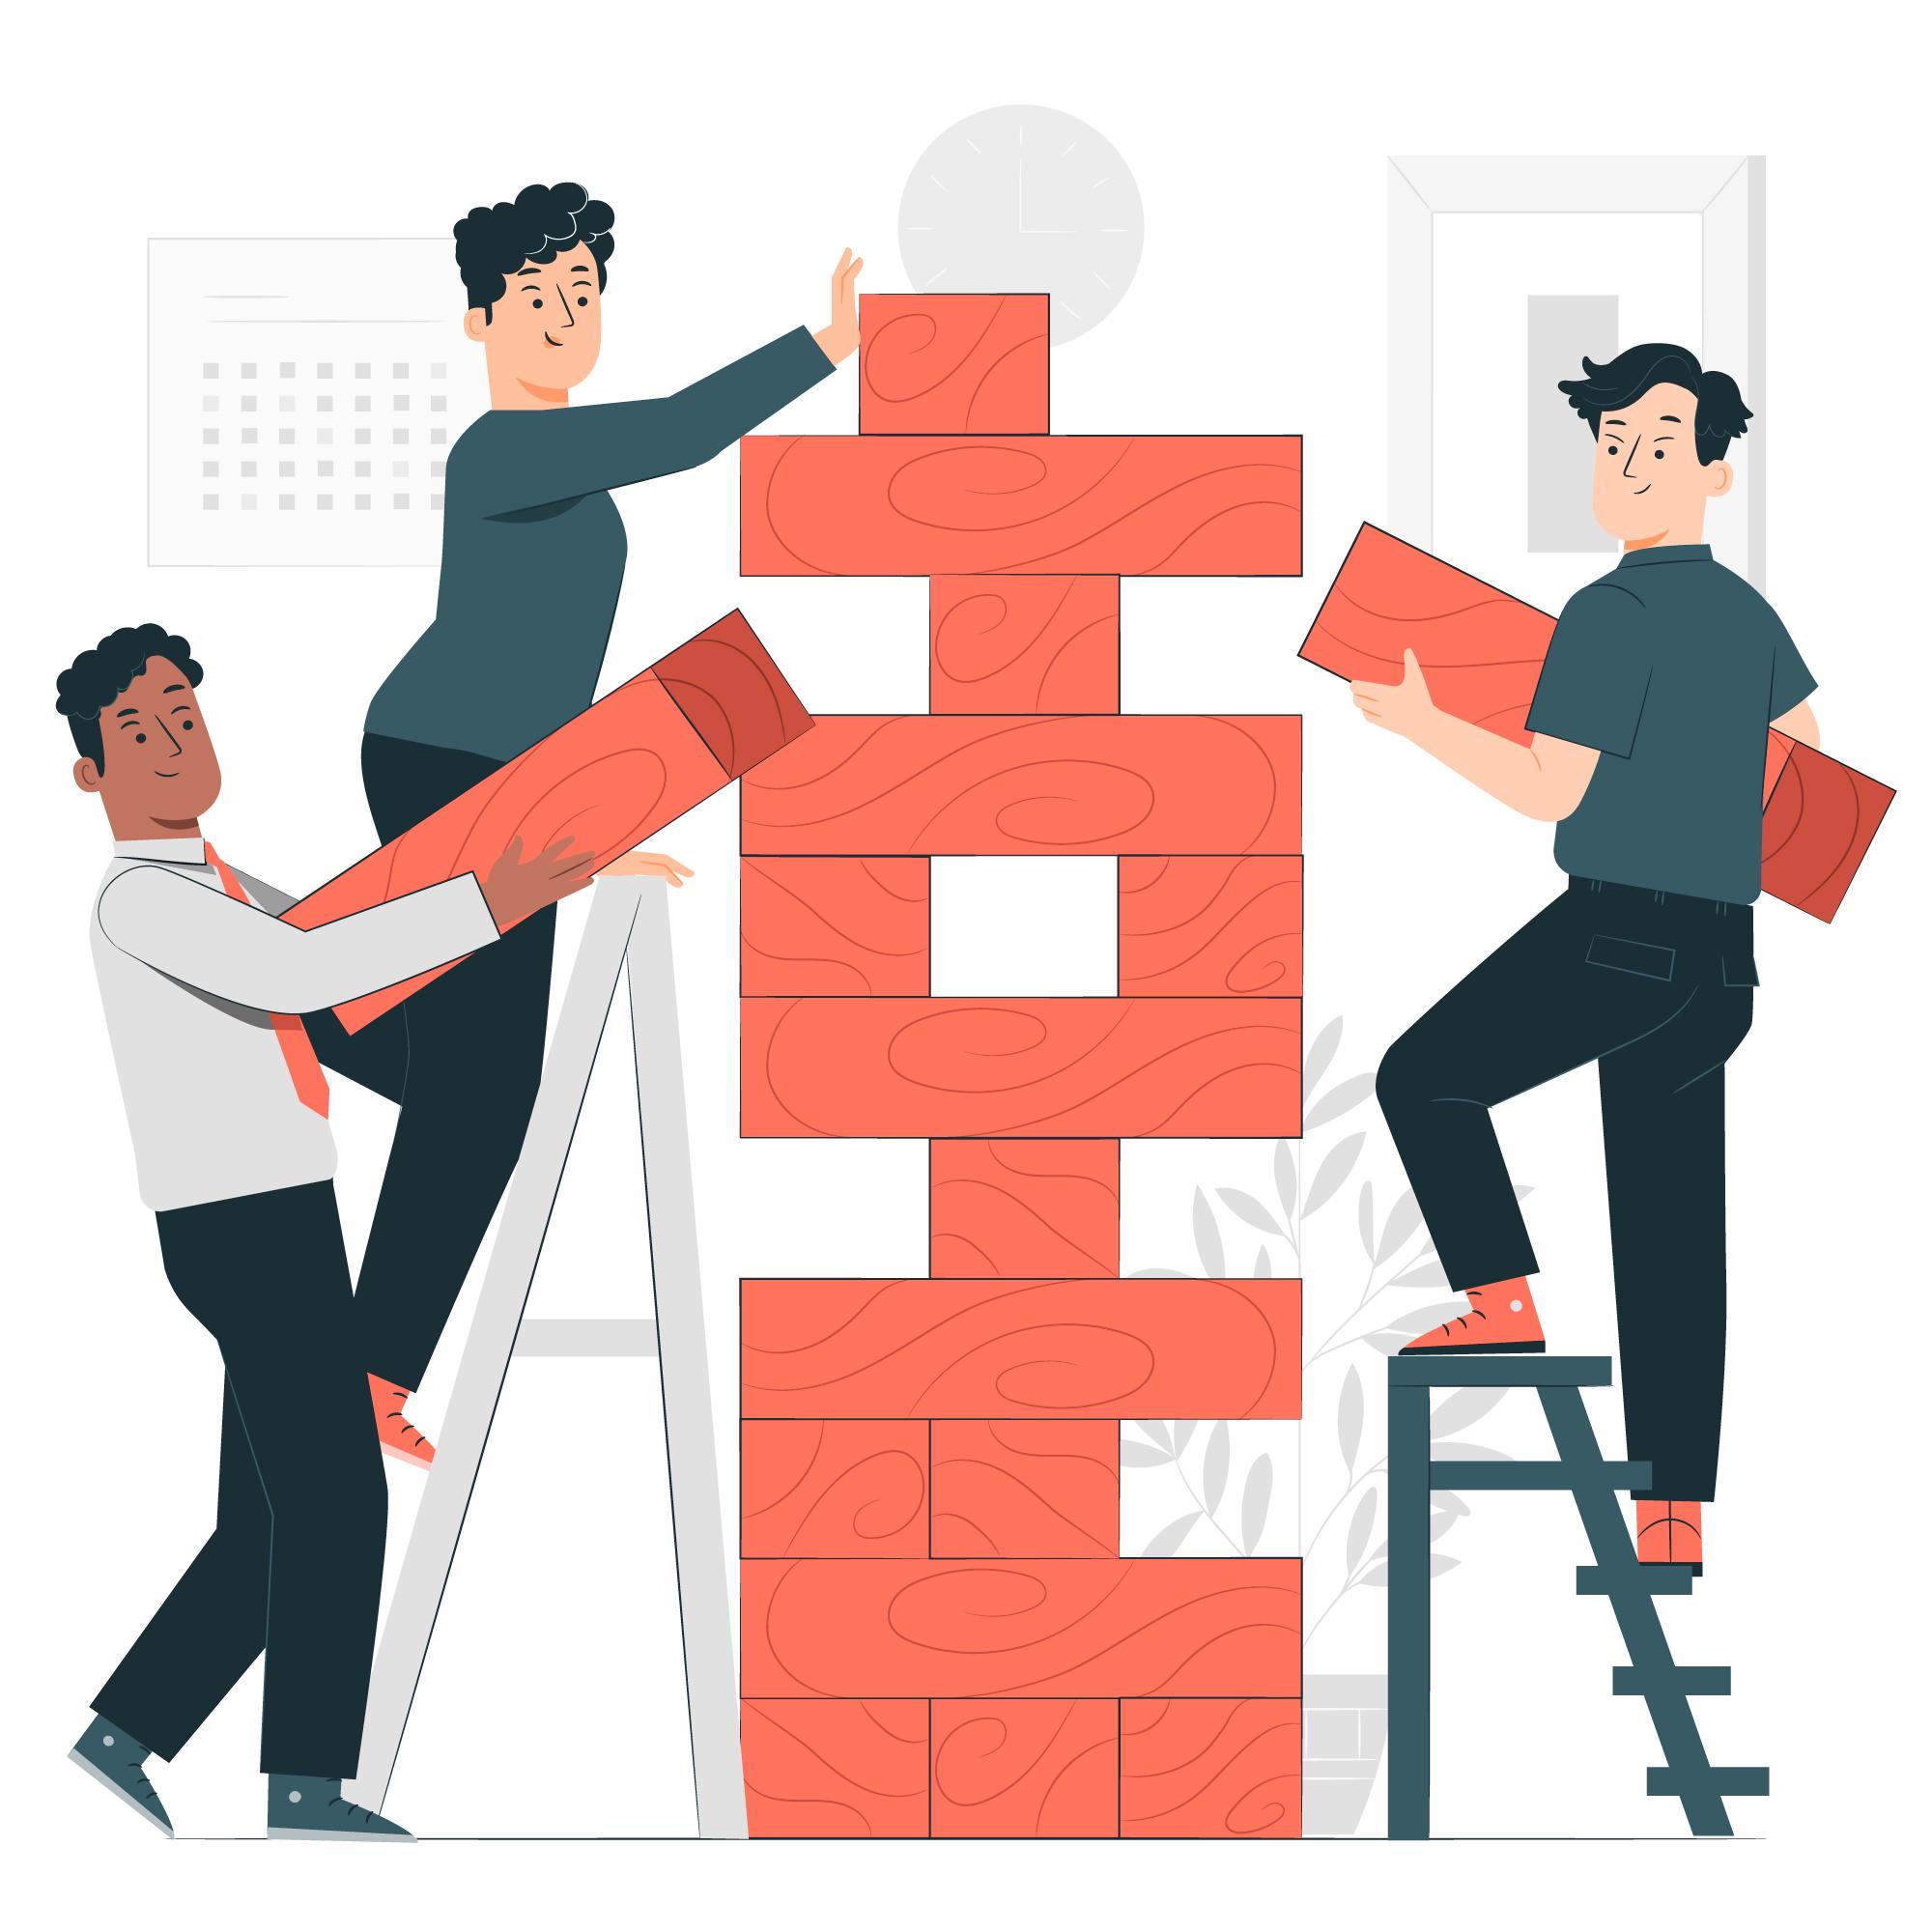 Three people building a structure